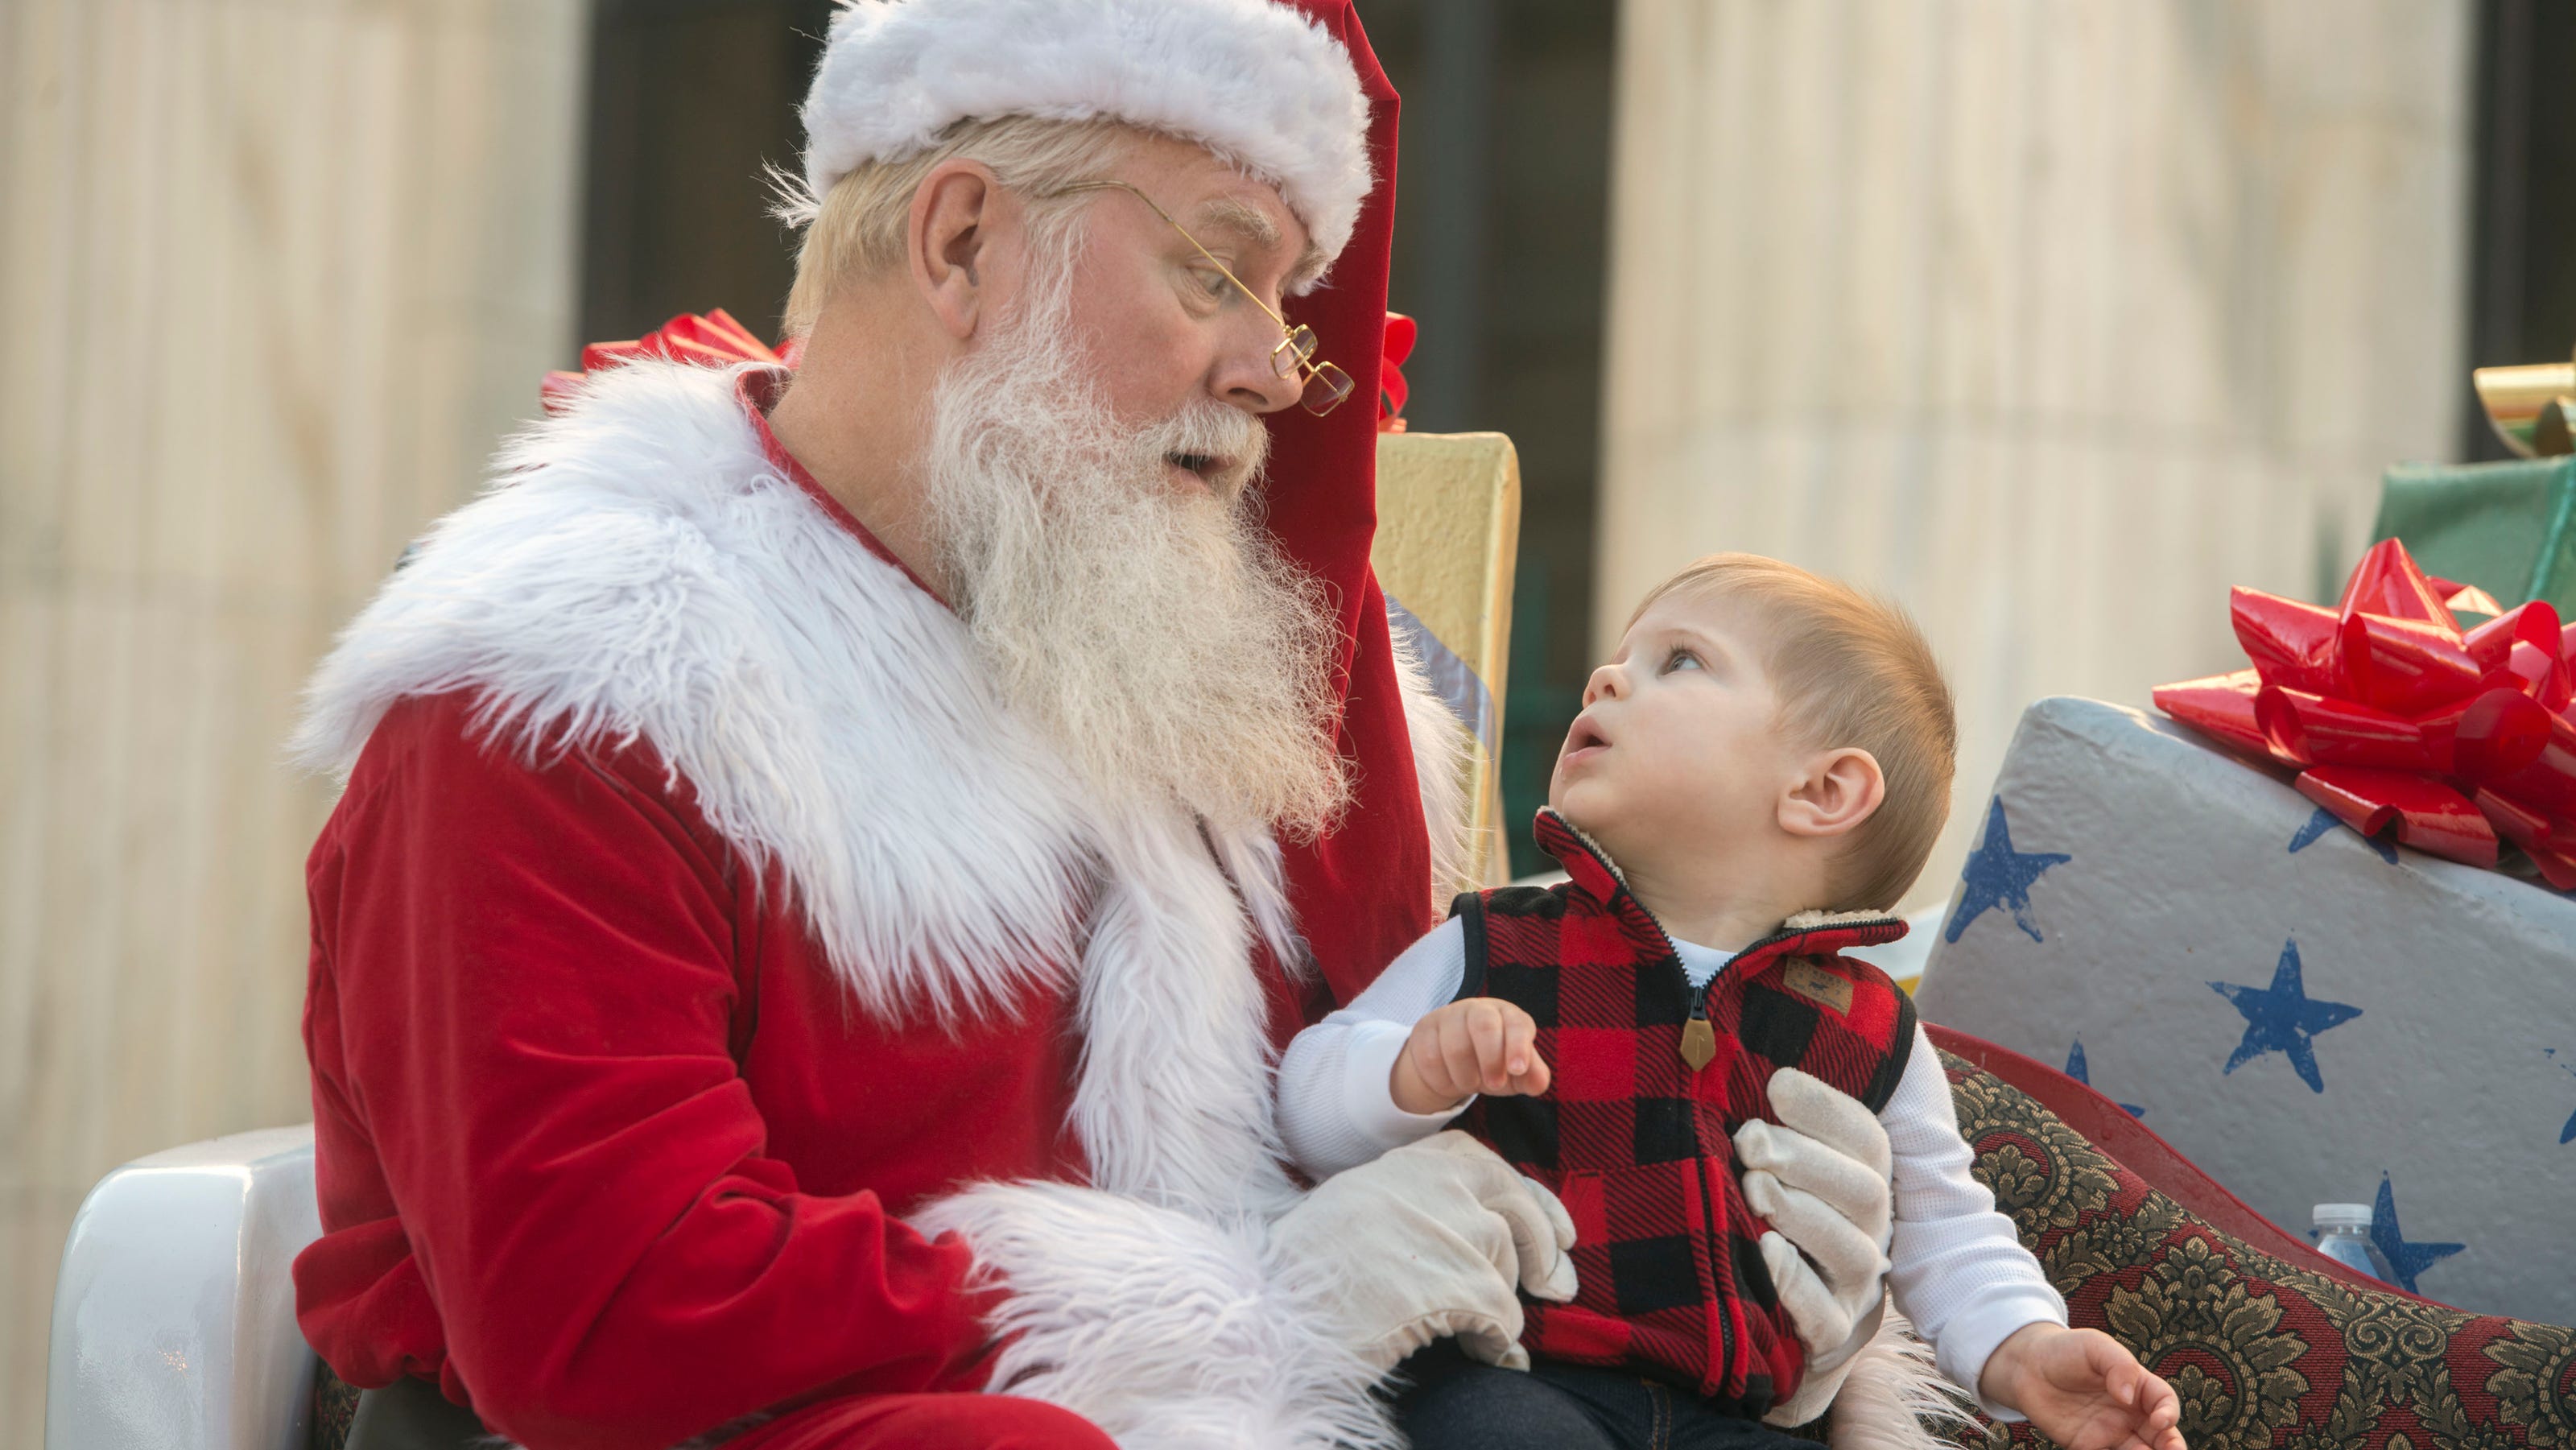 Five Pensacola Christmas events you don't want to miss starting now